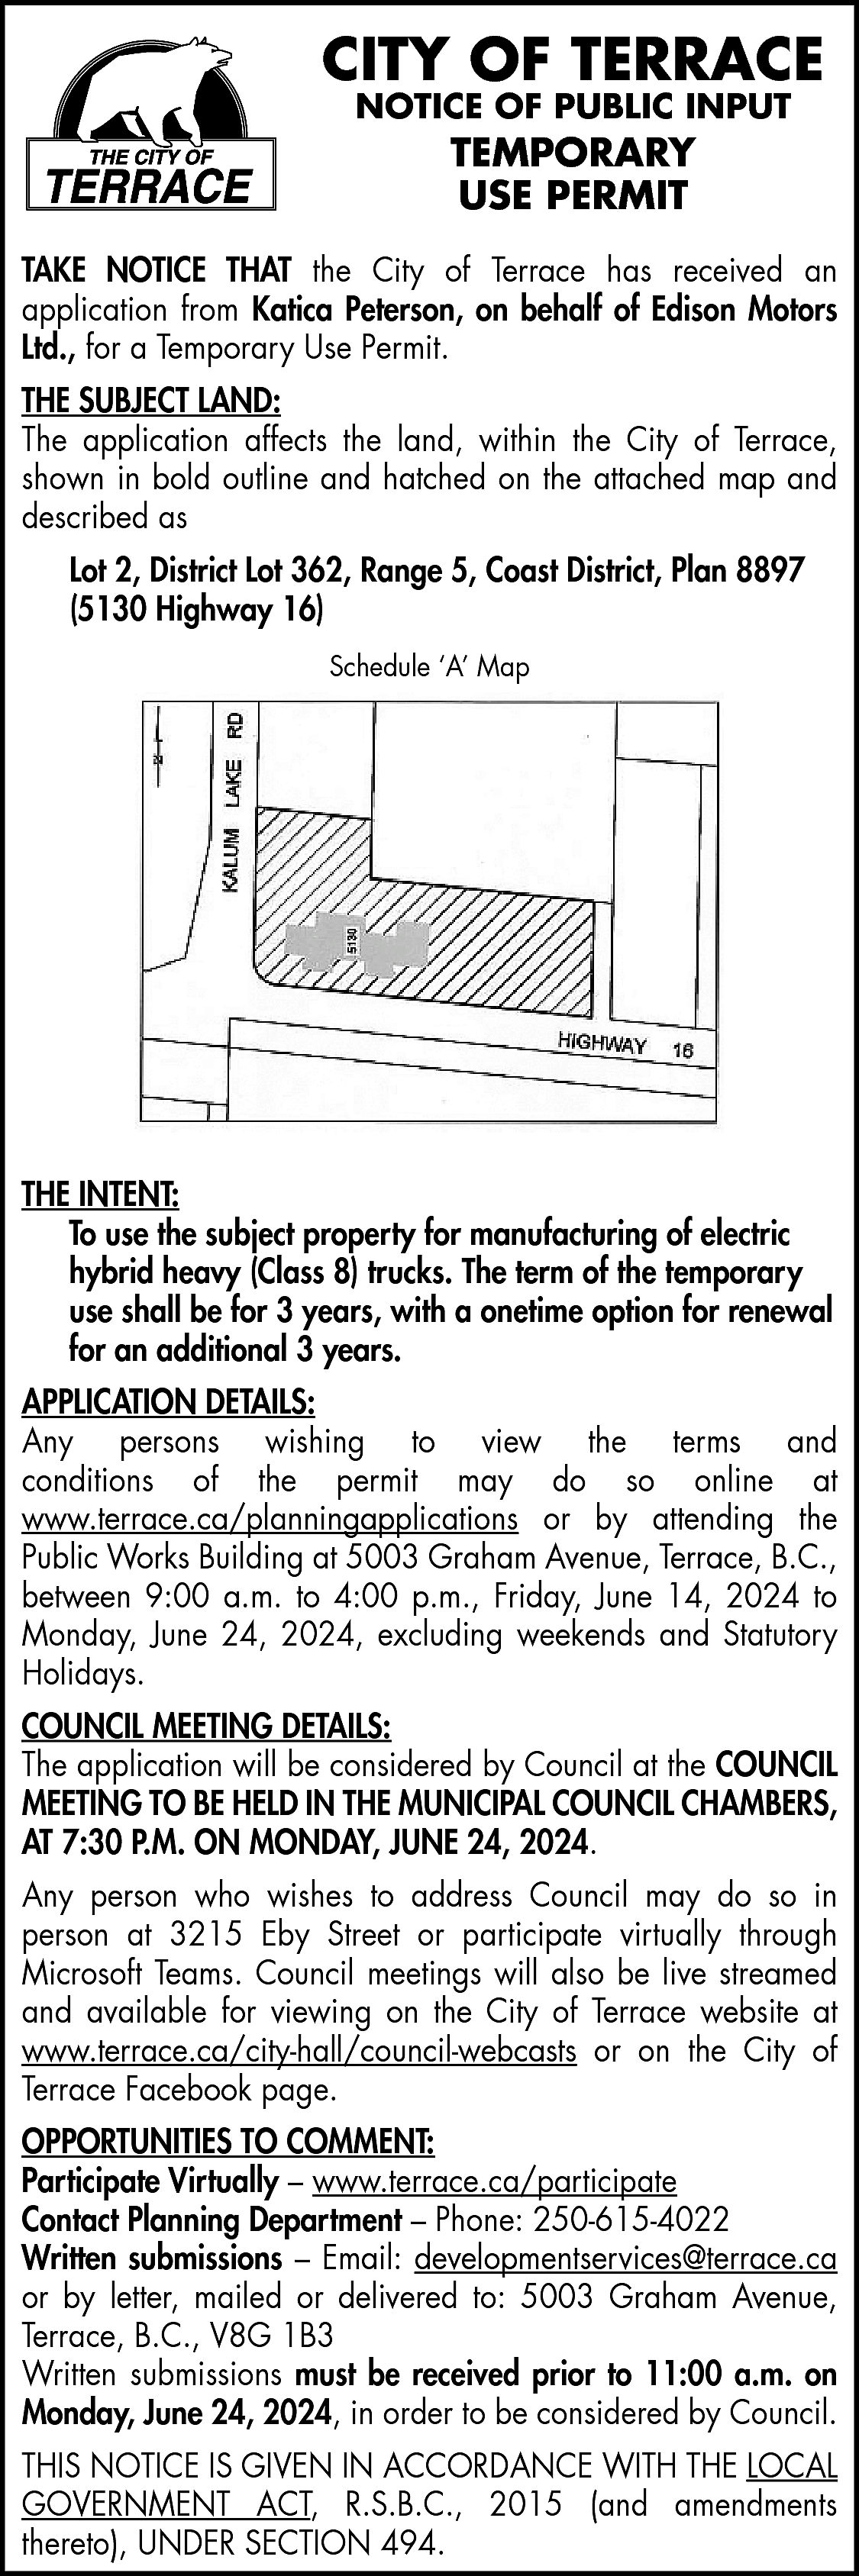 CITY OF TERRACE <br>NOTICE OF  CITY OF TERRACE  NOTICE OF PUBLIC INPUT    TEMPORARY  USE PERMIT    TAKE NOTICE THAT the City of Terrace has received an  application from Katica Peterson, on behalf of Edison Motors  Ltd., for a Temporary Use Permit.  THE SUBJECT LAND:  The application affects the land, within the City of Terrace,  shown in bold outline and hatched on the attached map and  described as  Lot 2, District Lot 362, Range 5, Coast District, Plan 8897  (5130 Highway 16)  Schedule ‘A’ Map    THE INTENT:  To use the subject property for manufacturing of electric  hybrid heavy (Class 8) trucks. The term of the temporary  use shall be for 3 years, with a onetime option for renewal  for an additional 3 years.  APPLICATION DETAILS:  Any persons wishing to view the terms and  conditions of the permit may do so online at  www.terrace.ca/planningapplications or by attending the  Public Works Building at 5003 Graham Avenue, Terrace, B.C.,  between 9:00 a.m. to 4:00 p.m., Friday, June 14, 2024 to  Monday, June 24, 2024, excluding weekends and Statutory  Holidays.  COUNCIL MEETING DETAILS:  The application will be considered by Council at the COUNCIL  MEETING TO BE HELD IN THE MUNICIPAL COUNCIL CHAMBERS,  AT 7:30 P.M. ON MONDAY, JUNE 24, 2024.  Any person who wishes to address Council may do so in  person at 3215 Eby Street or participate virtually through  Microsoft Teams. Council meetings will also be live streamed  and available for viewing on the City of Terrace website at  www.terrace.ca/city-hall/council-webcasts or on the City of  Terrace Facebook page.  OPPORTUNITIES TO COMMENT:  Participate Virtually – www.terrace.ca/participate  Contact Planning Department – Phone: 250-615-4022  Written submissions – Email: developmentservices@terrace.ca  or by letter, mailed or delivered to: 5003 Graham Avenue,  Terrace, B.C., V8G 1B3  Written submissions must be received prior to 11:00 a.m. on  Monday, June 24, 2024, in order to be considered by Council.  THIS NOTICE IS GIVEN IN ACCORDANCE WITH THE LOCAL  GOVERNMENT ACT, R.S.B.C., 2015 (and amendments  thereto), UNDER SECTION 494.    